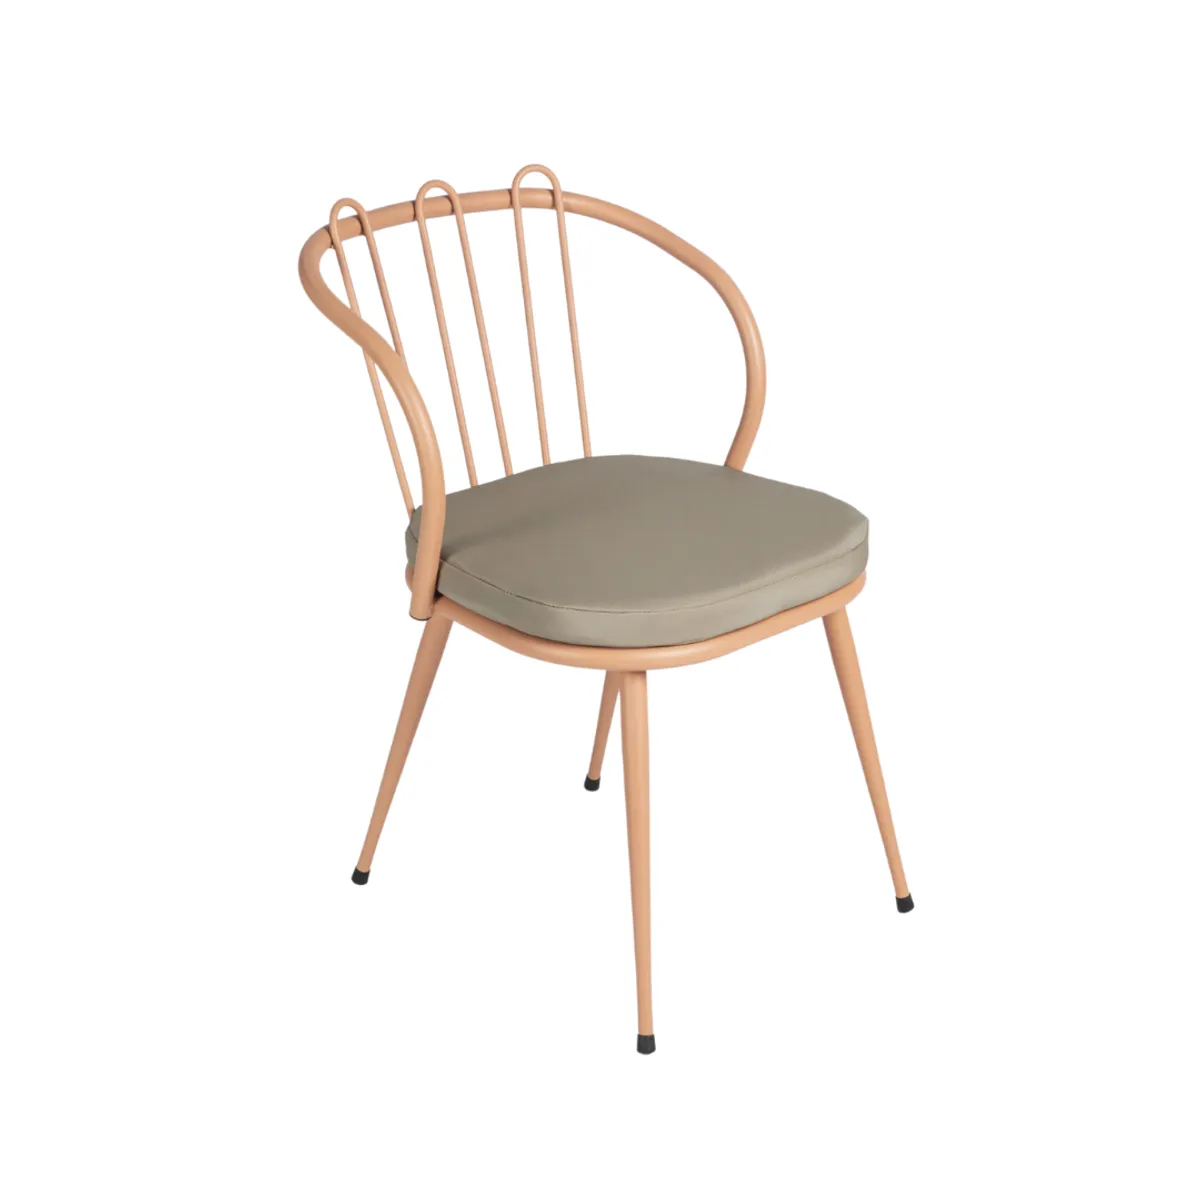 Pablo side chair 2